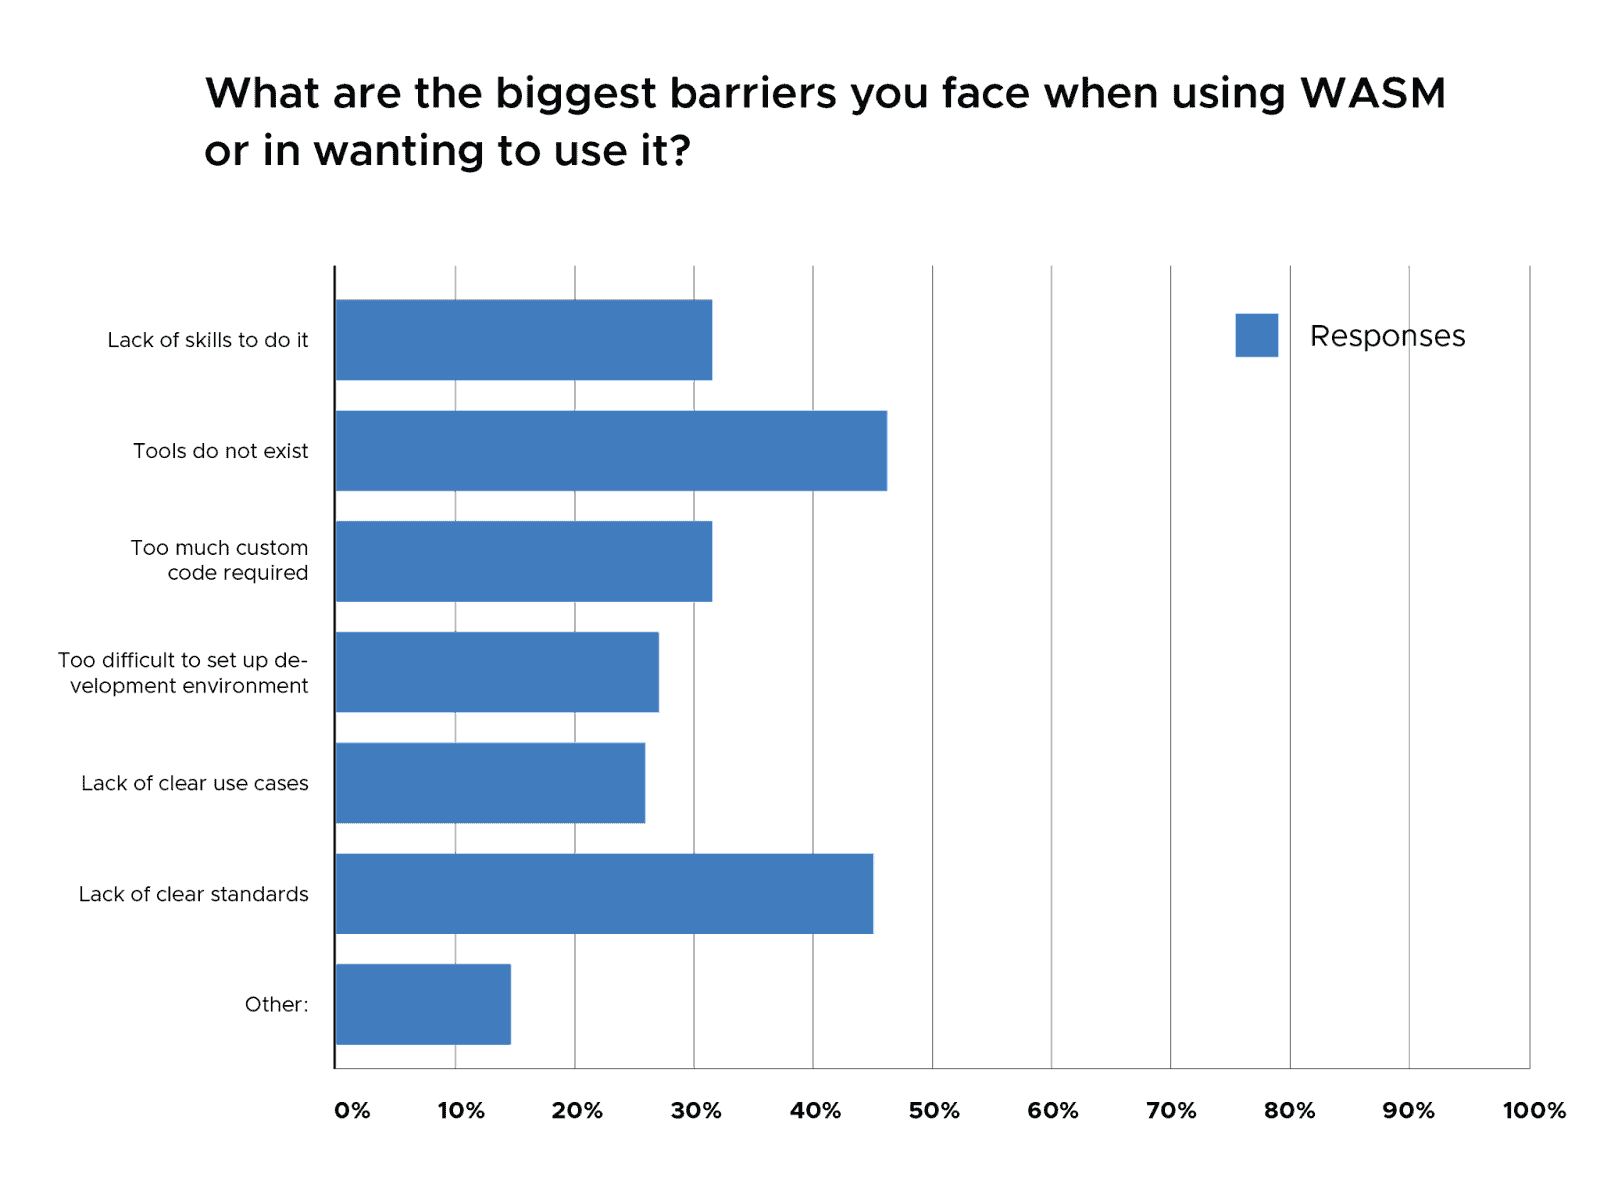 Bar chart showing the biggest barriers respondents face when using WASM or in wanting to use it is when the tools do not exist